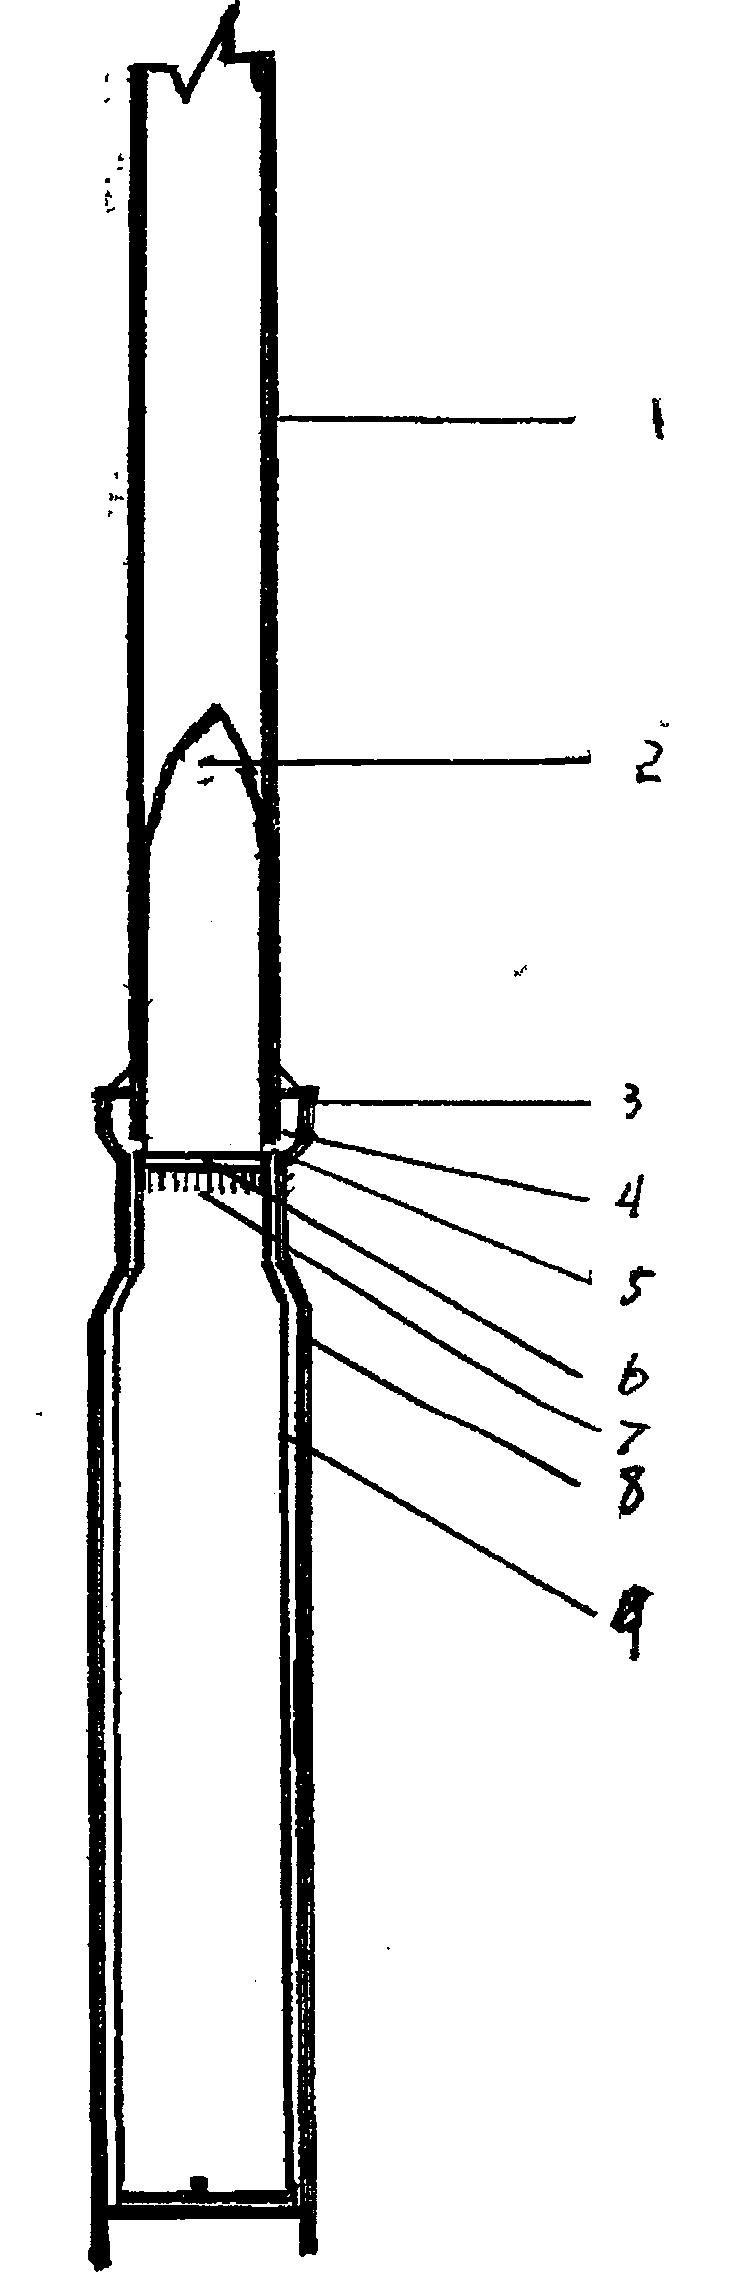 Device for eliminating recoil of various firearms